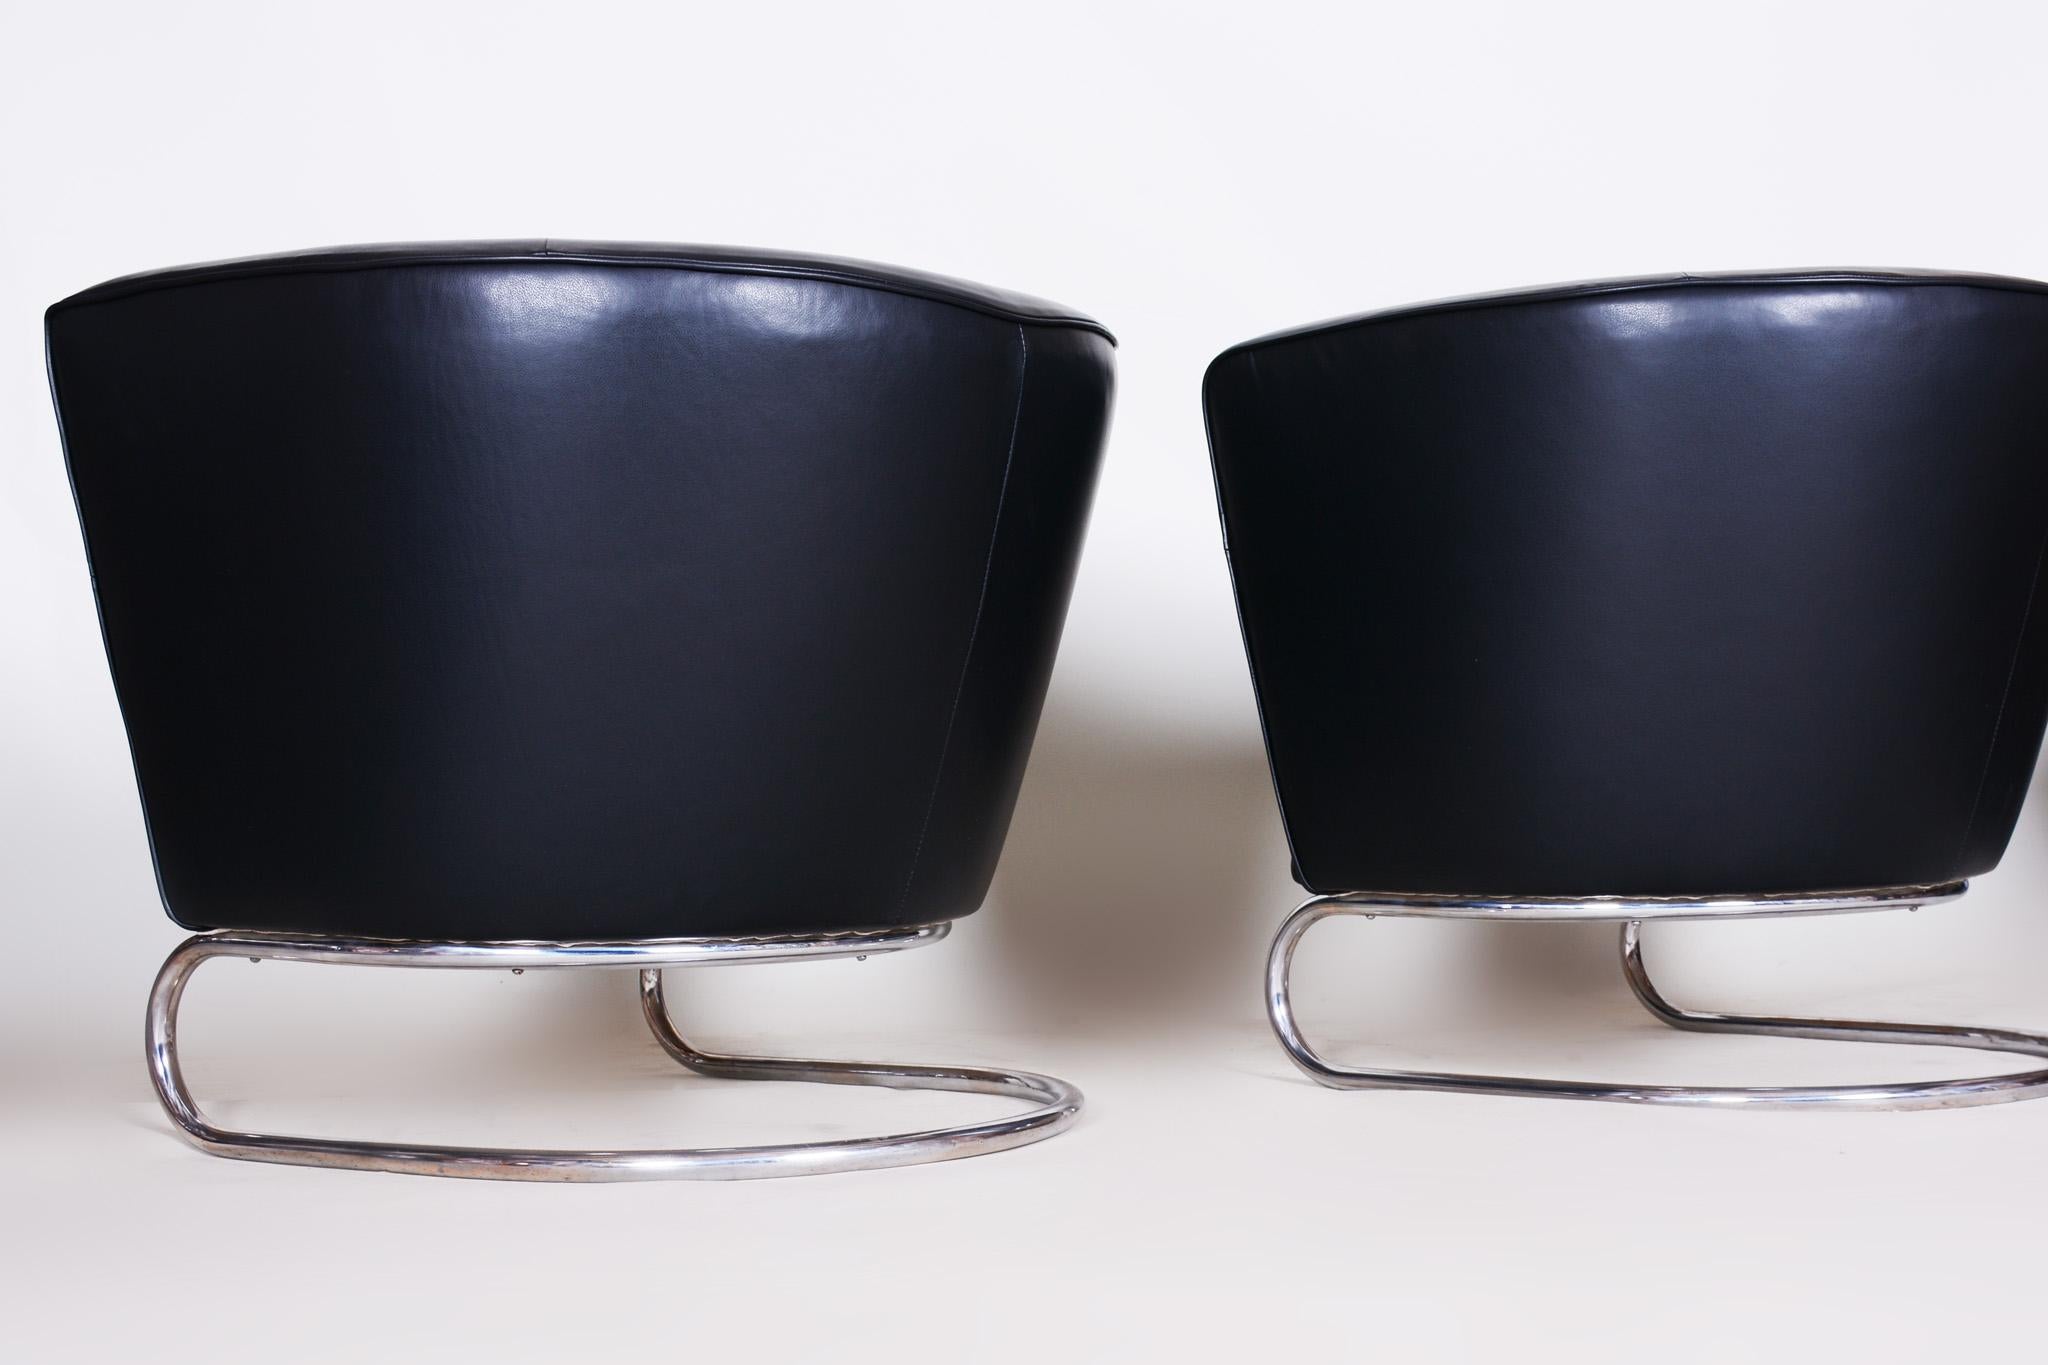 Pair of Black Art Deco Armchairs from Czechoslovakia by Jindrich Halabala, 1930s For Sale 5